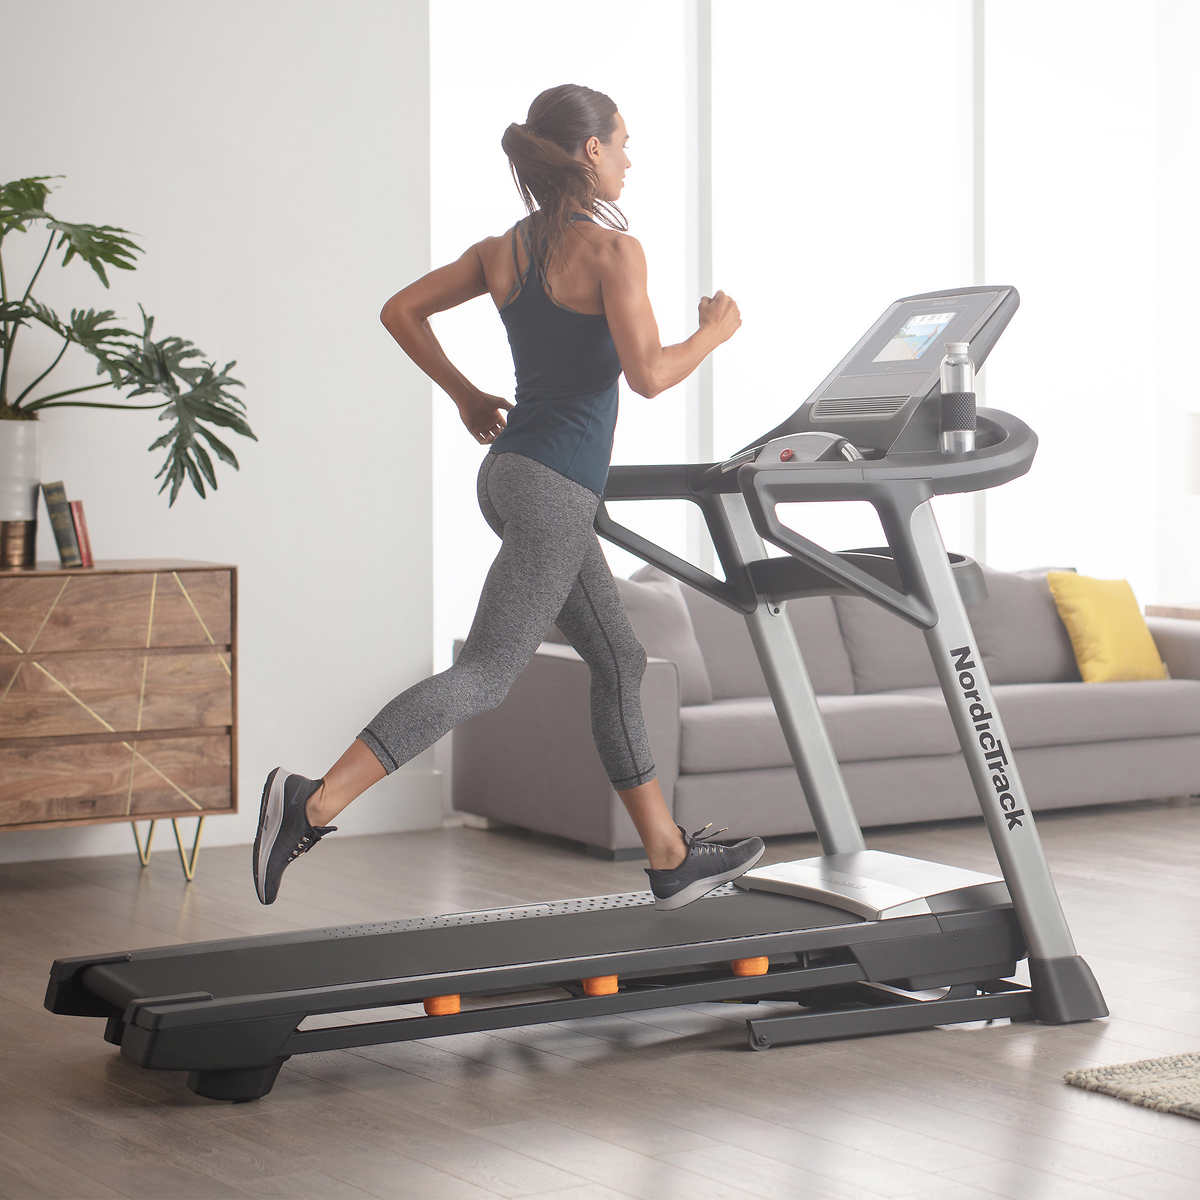 Nordictrack Elite 1000 Treadmill With 1 Year Ifit Membership Included Assembly Included Costco